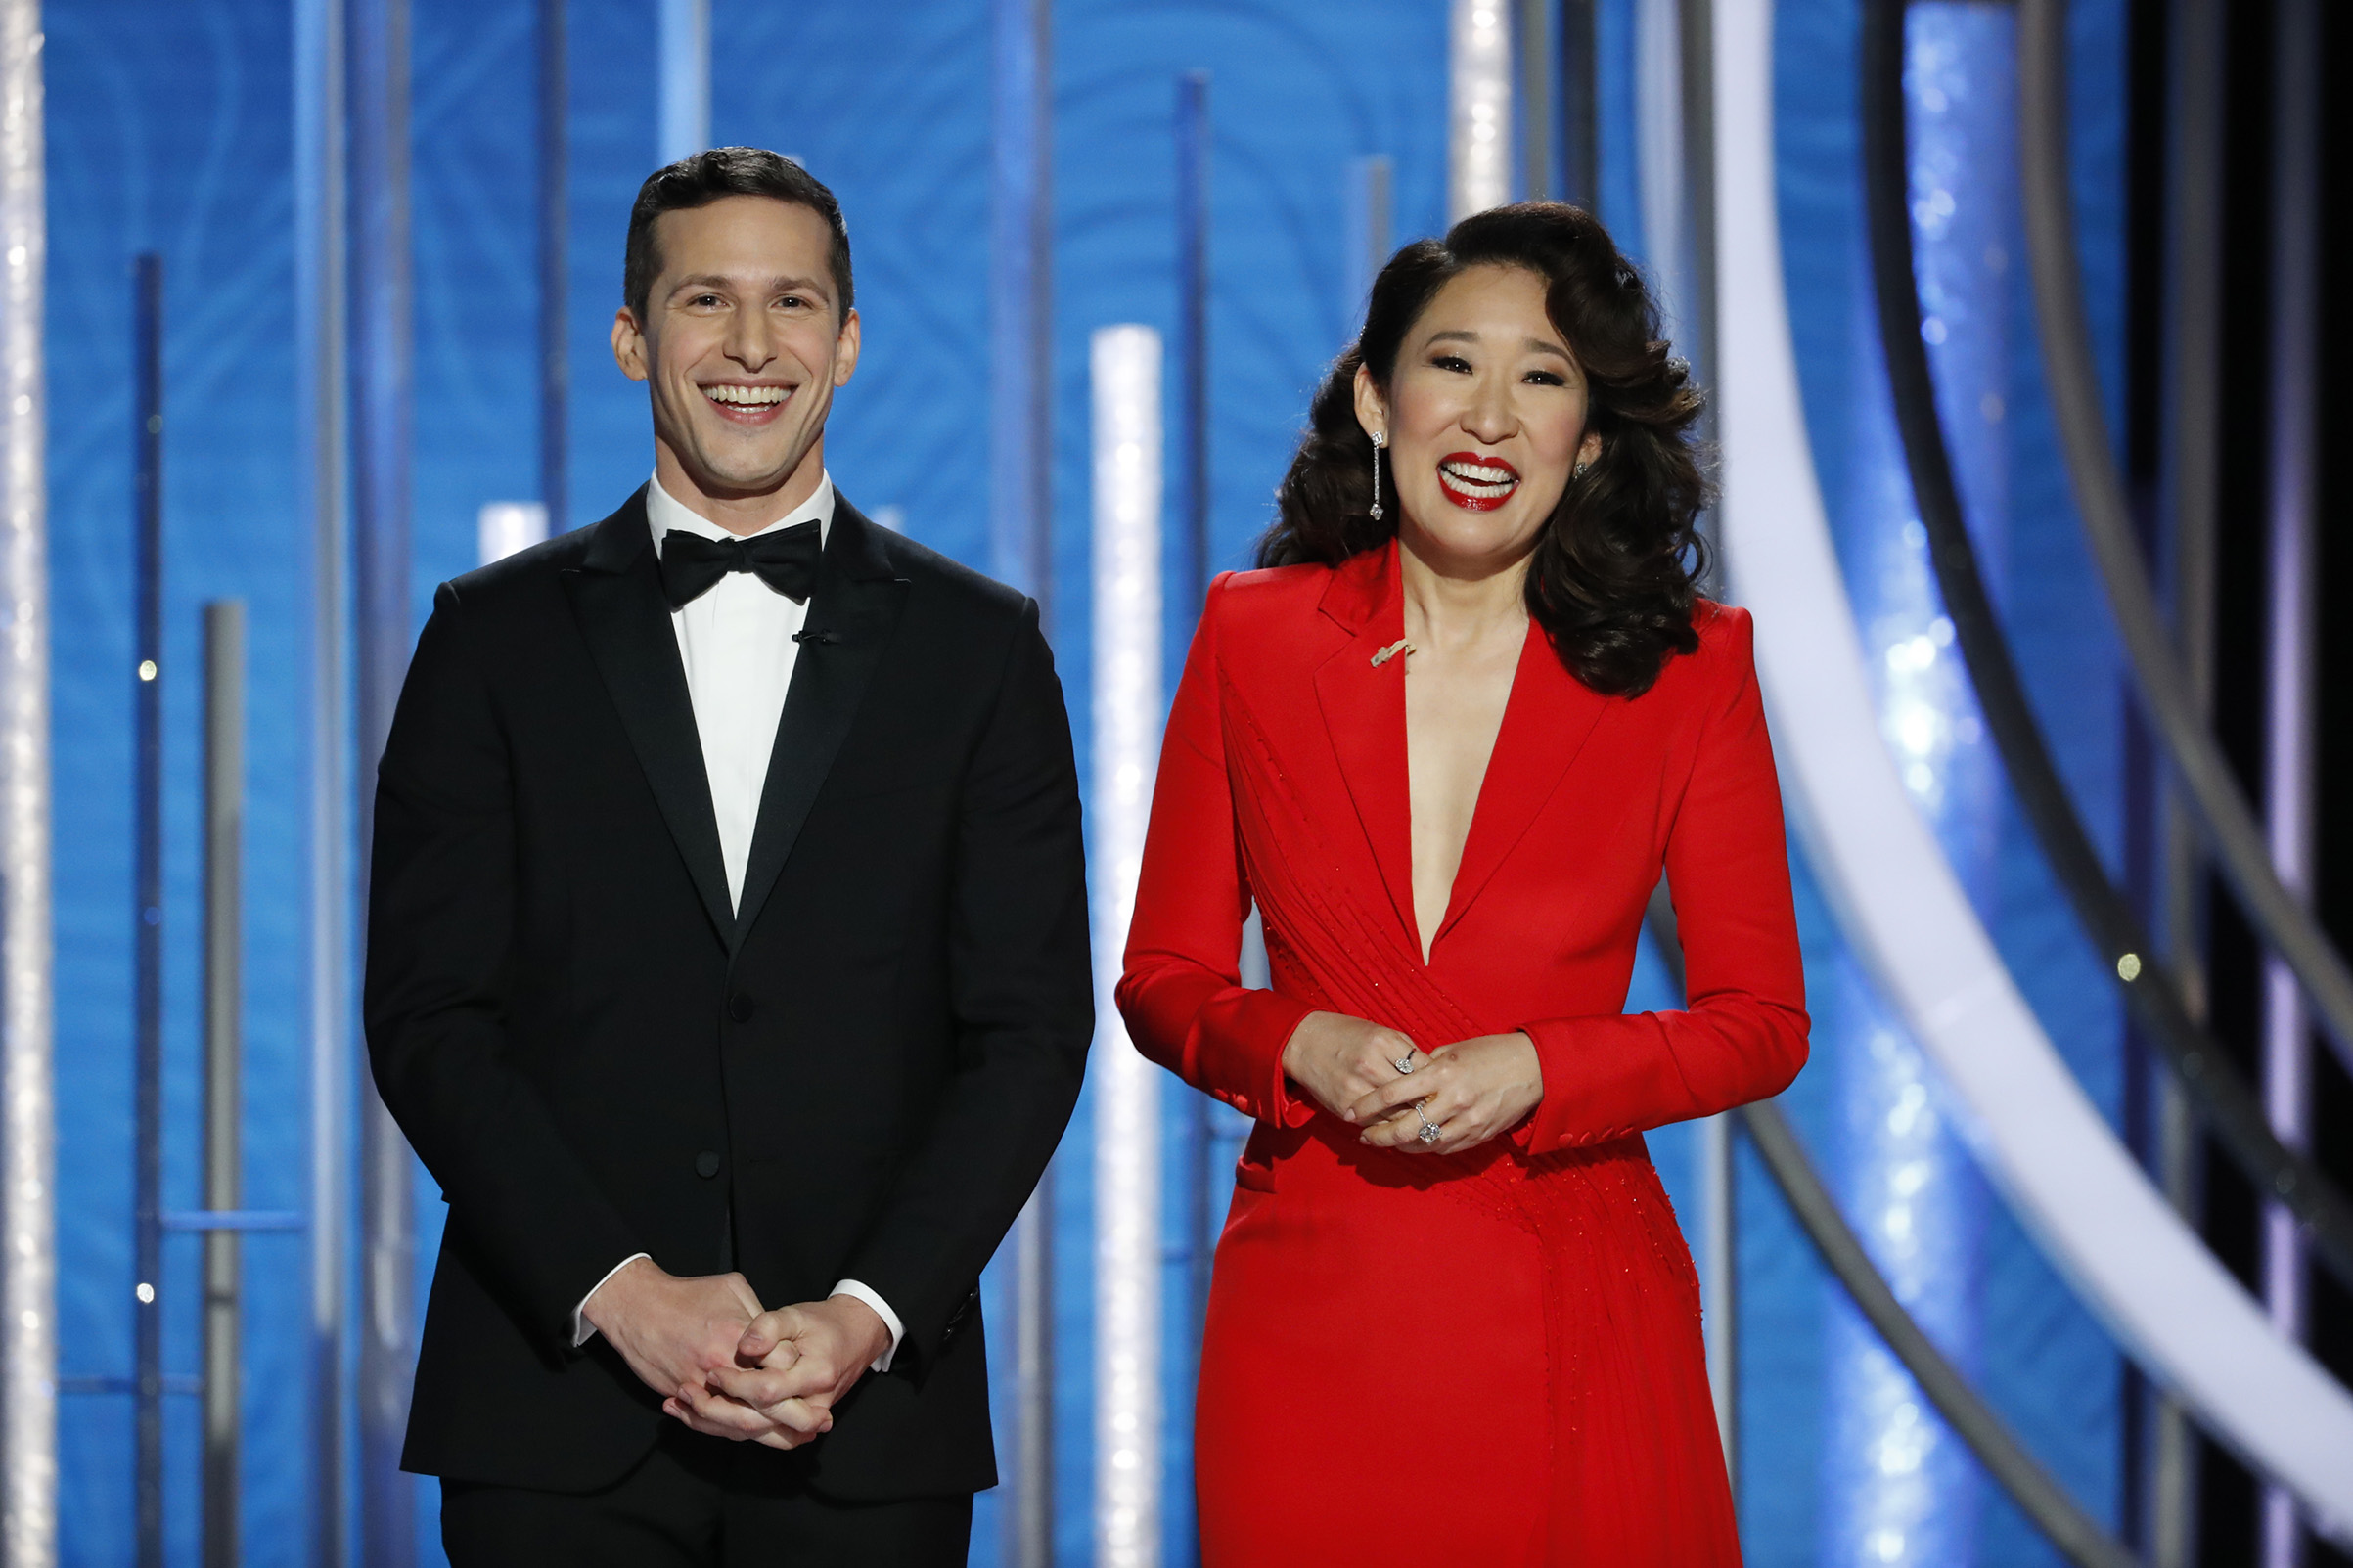 Hosts Andy Samberg and Sandra Oh speak onstage during the 76th Annual Golden Globe Awards. (NBCUniversal/Getty Images)